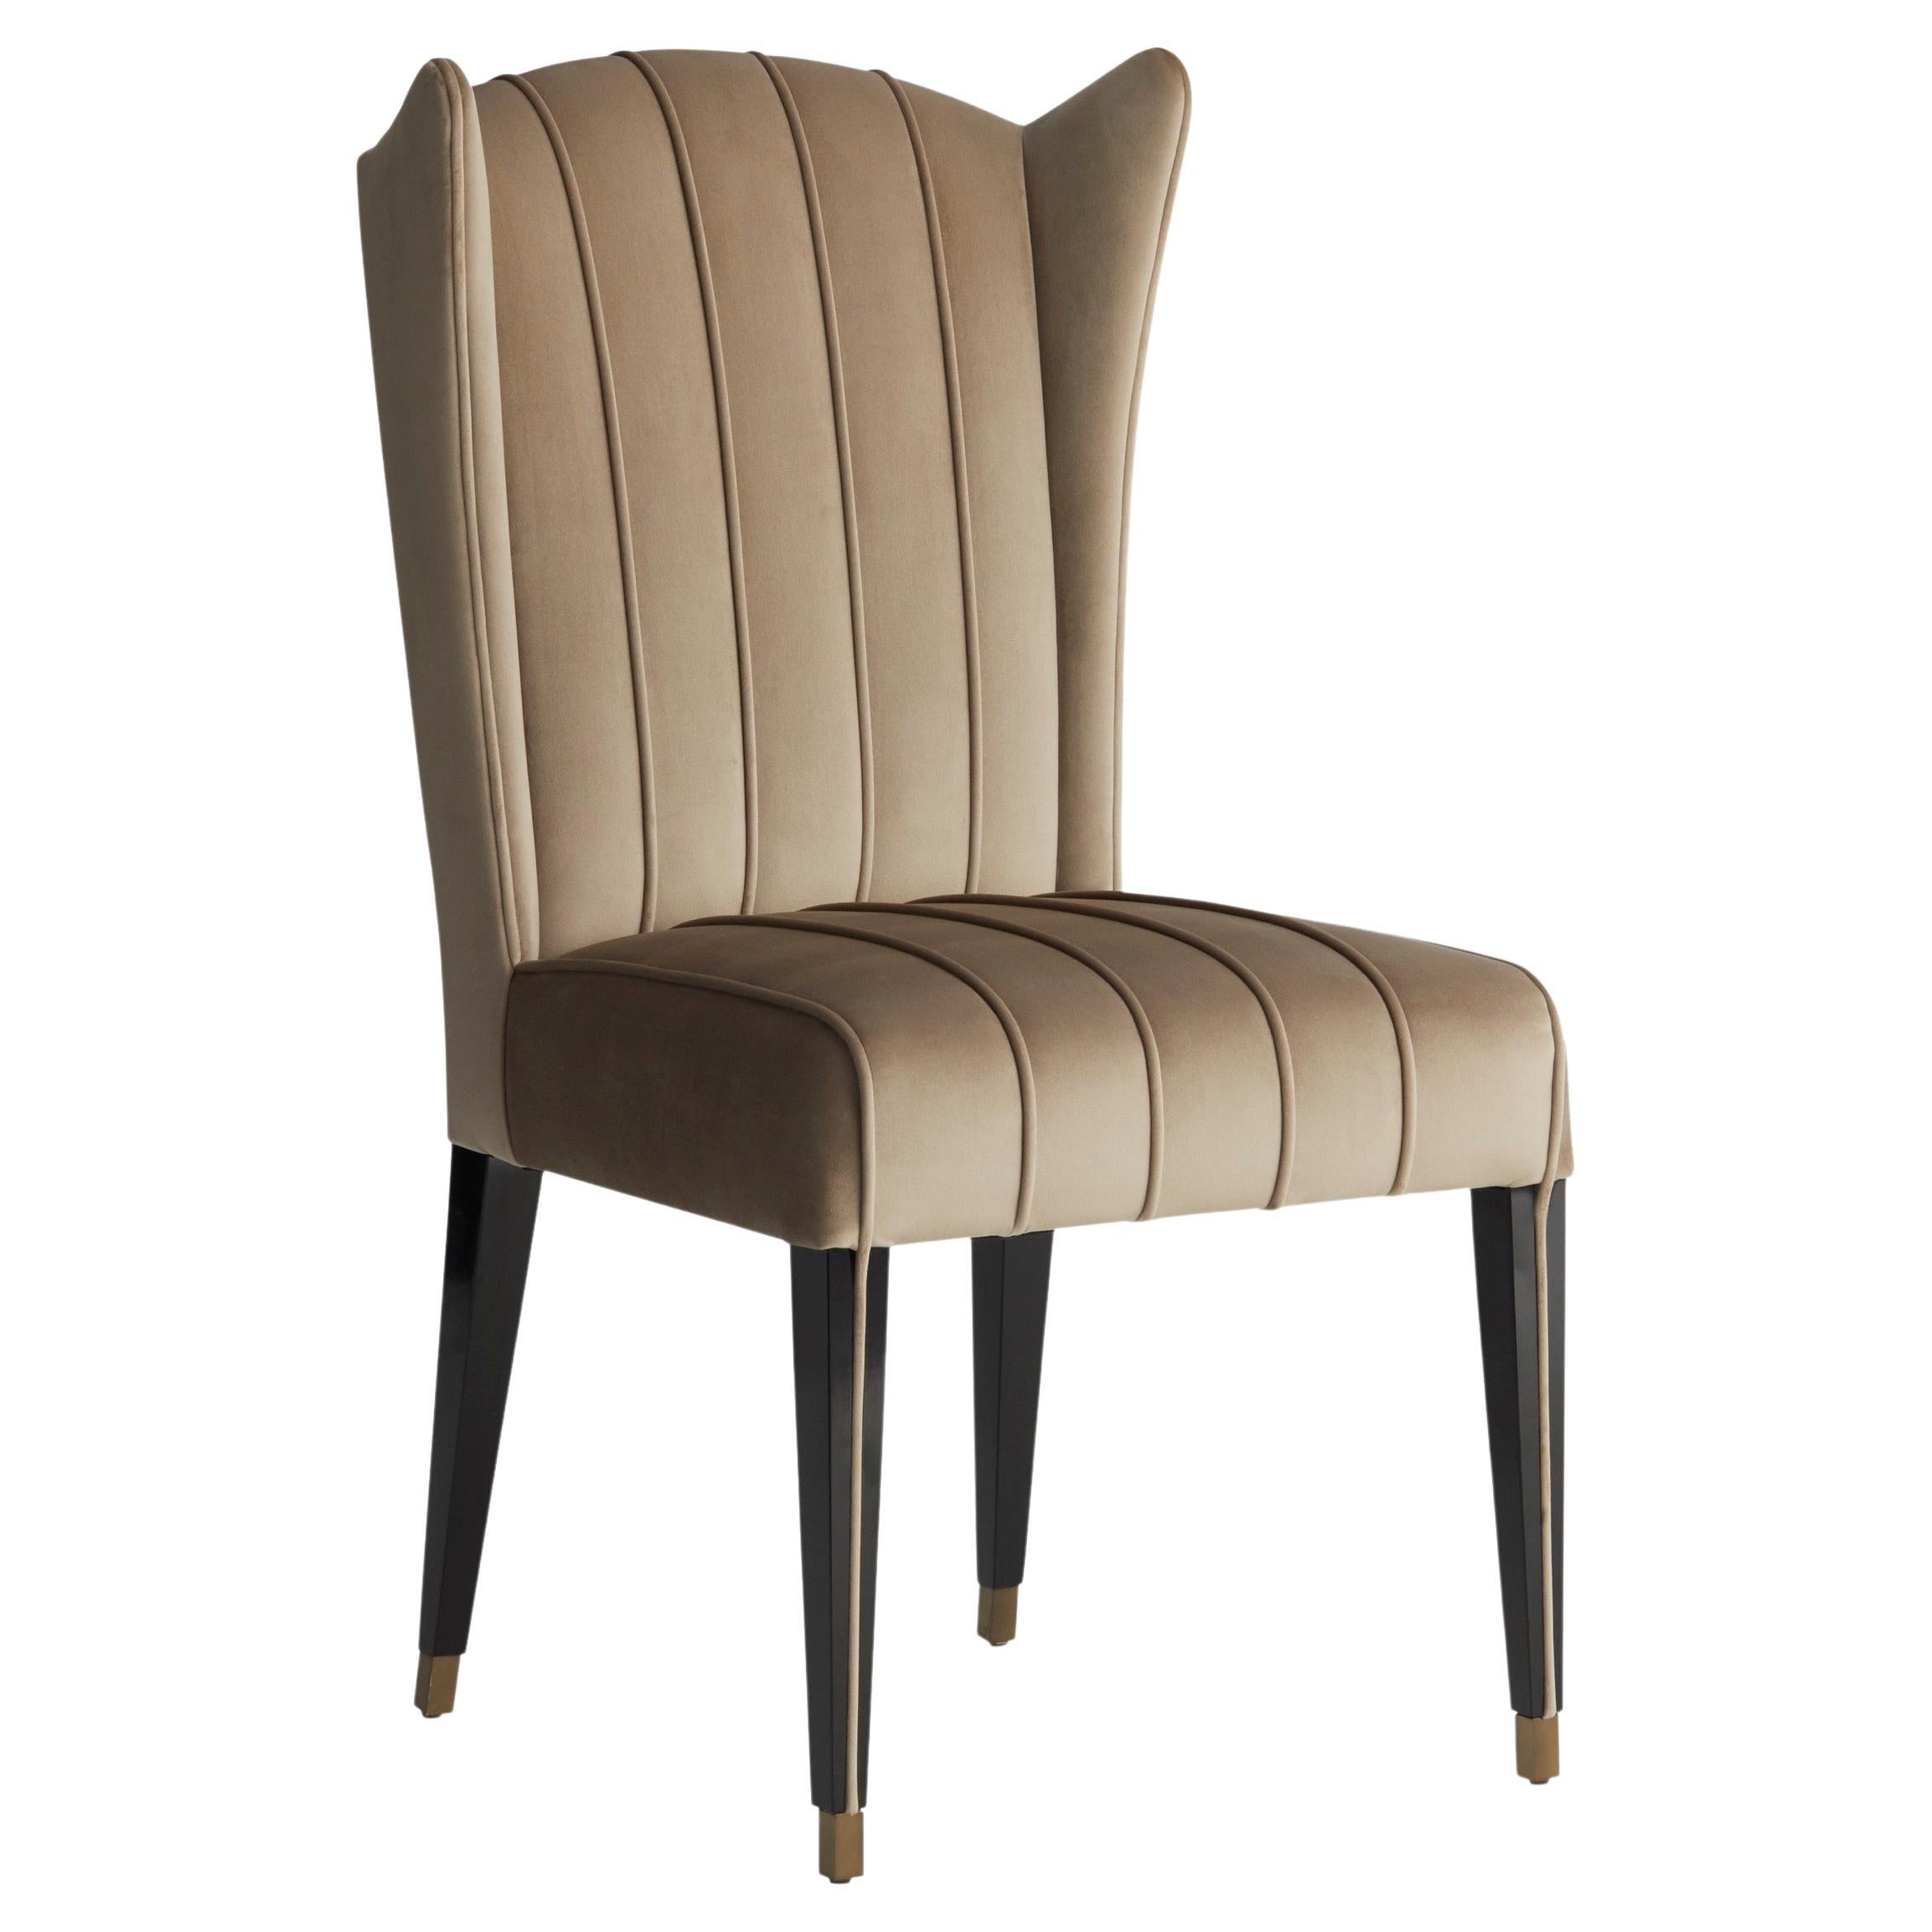 GLORIA II dining chair with brass tips